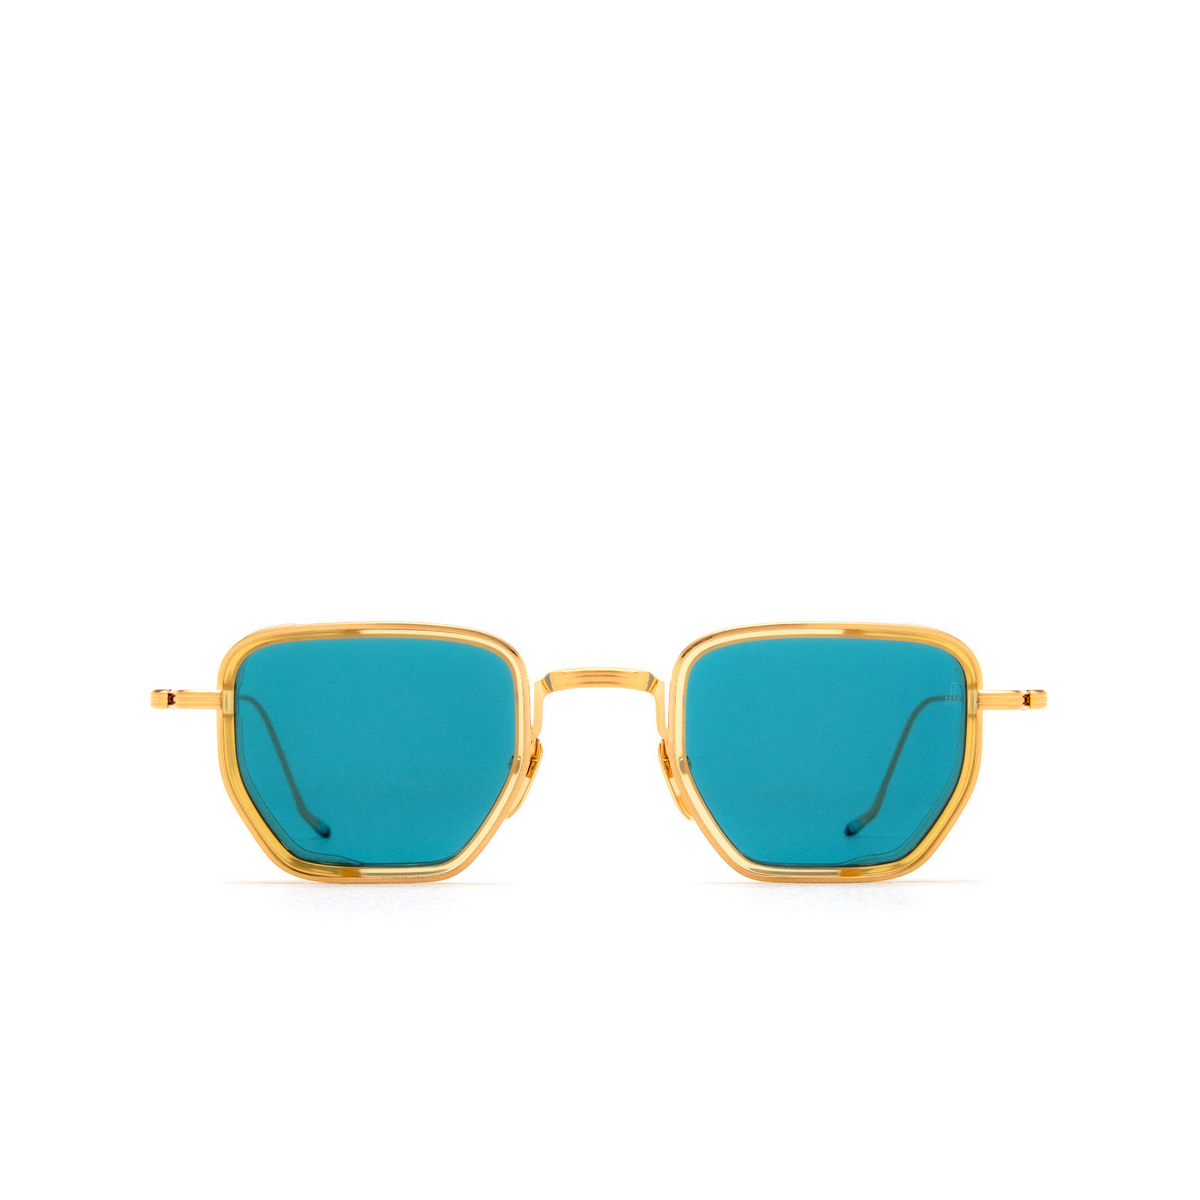 Jacques Marie Mage ATKINS Sunglasses KNOX - front view